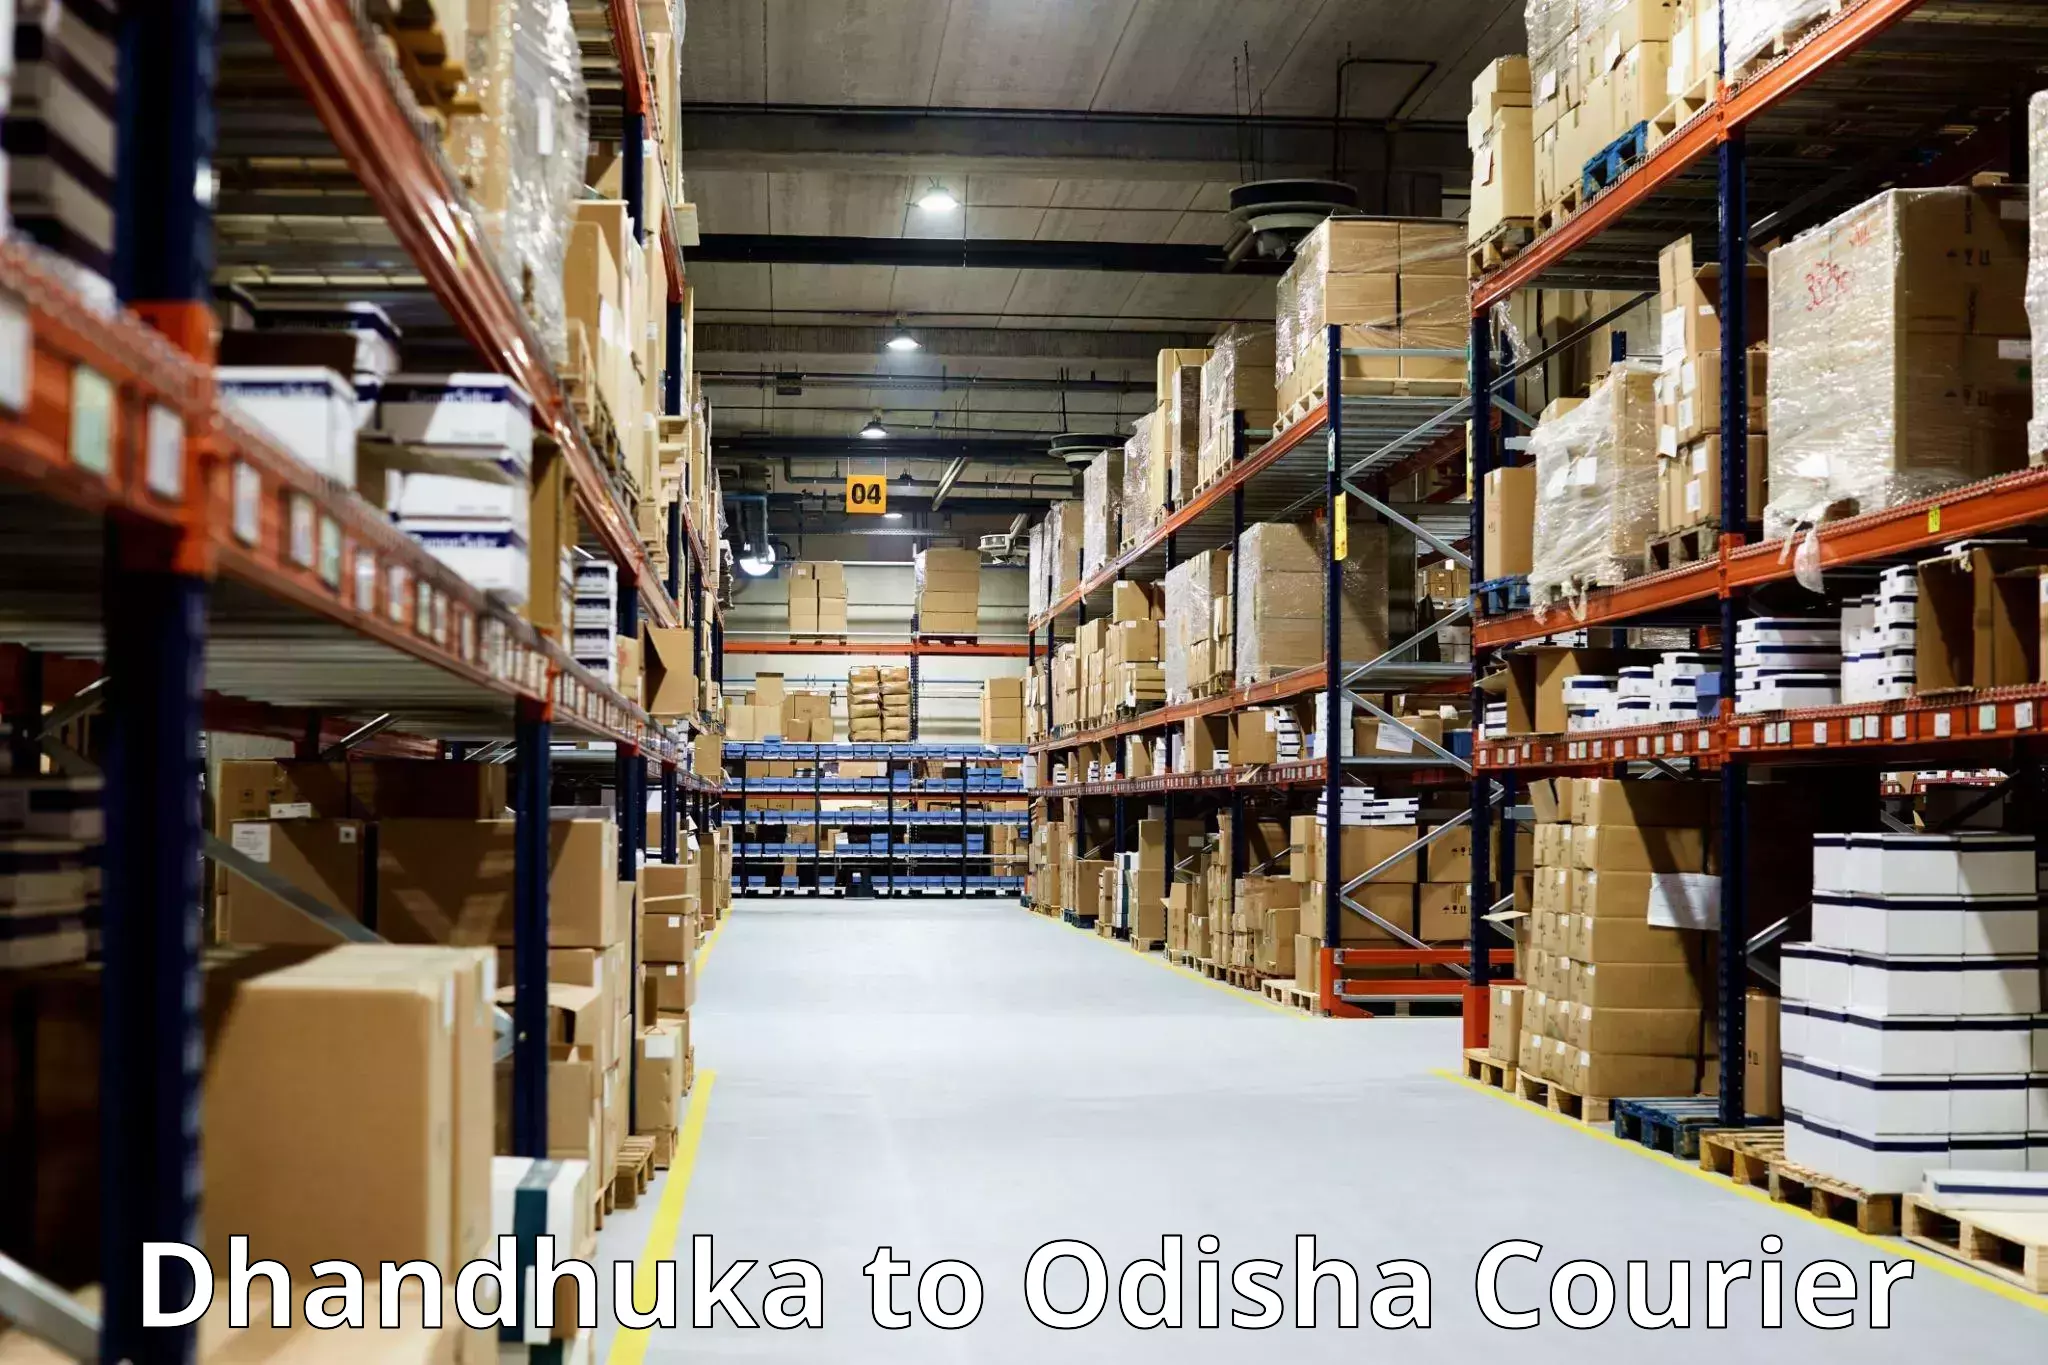 Luggage shipment specialists Dhandhuka to Galleri